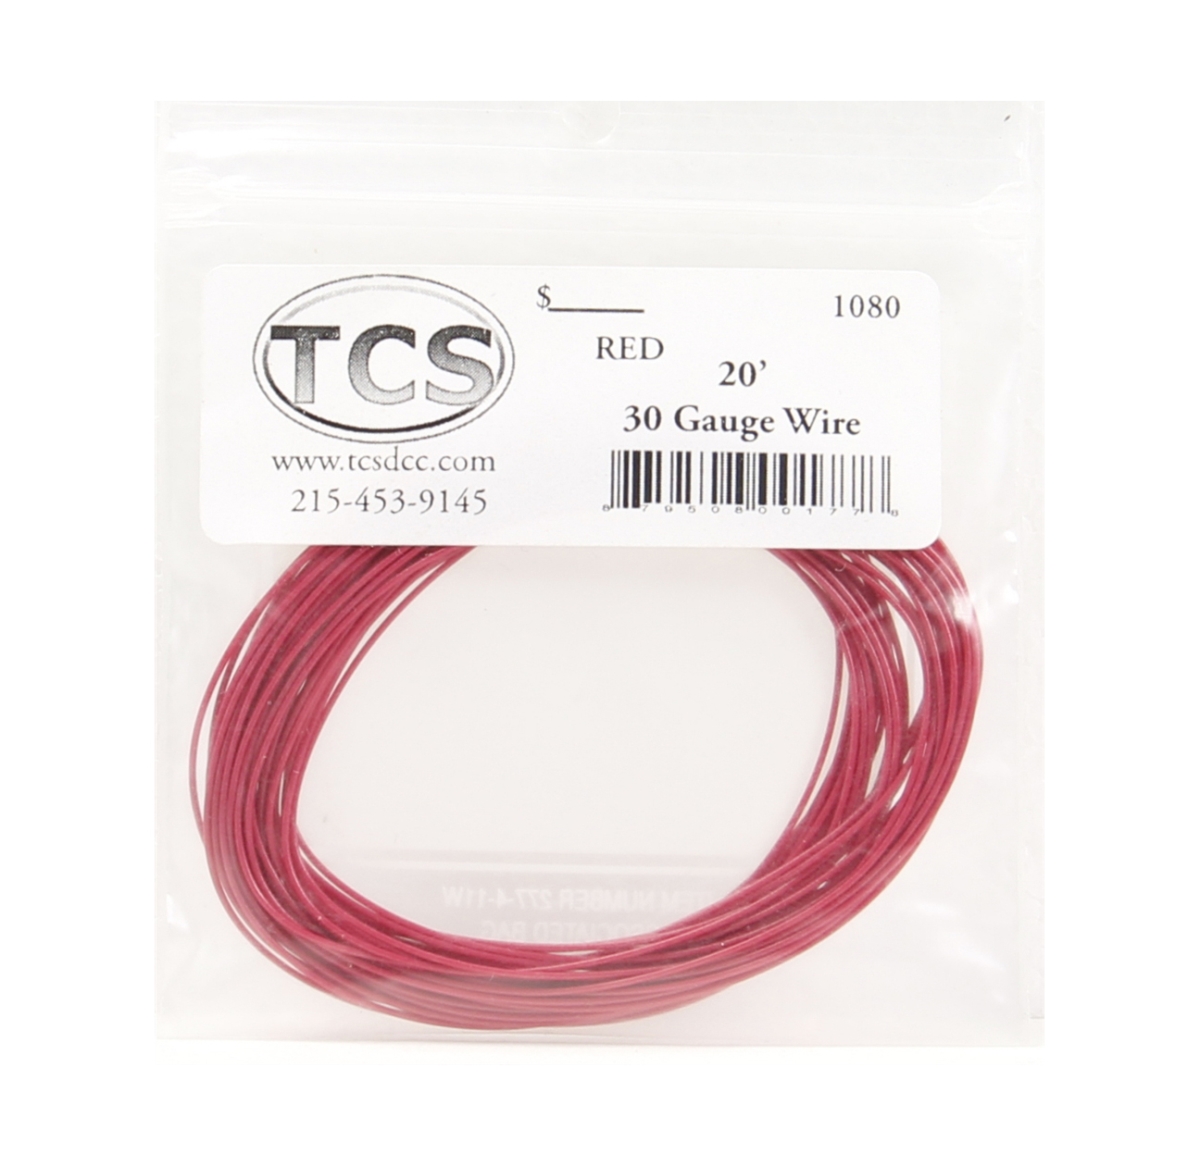 Tcs1080 20 Ft. 30 Gauge Wire - Red